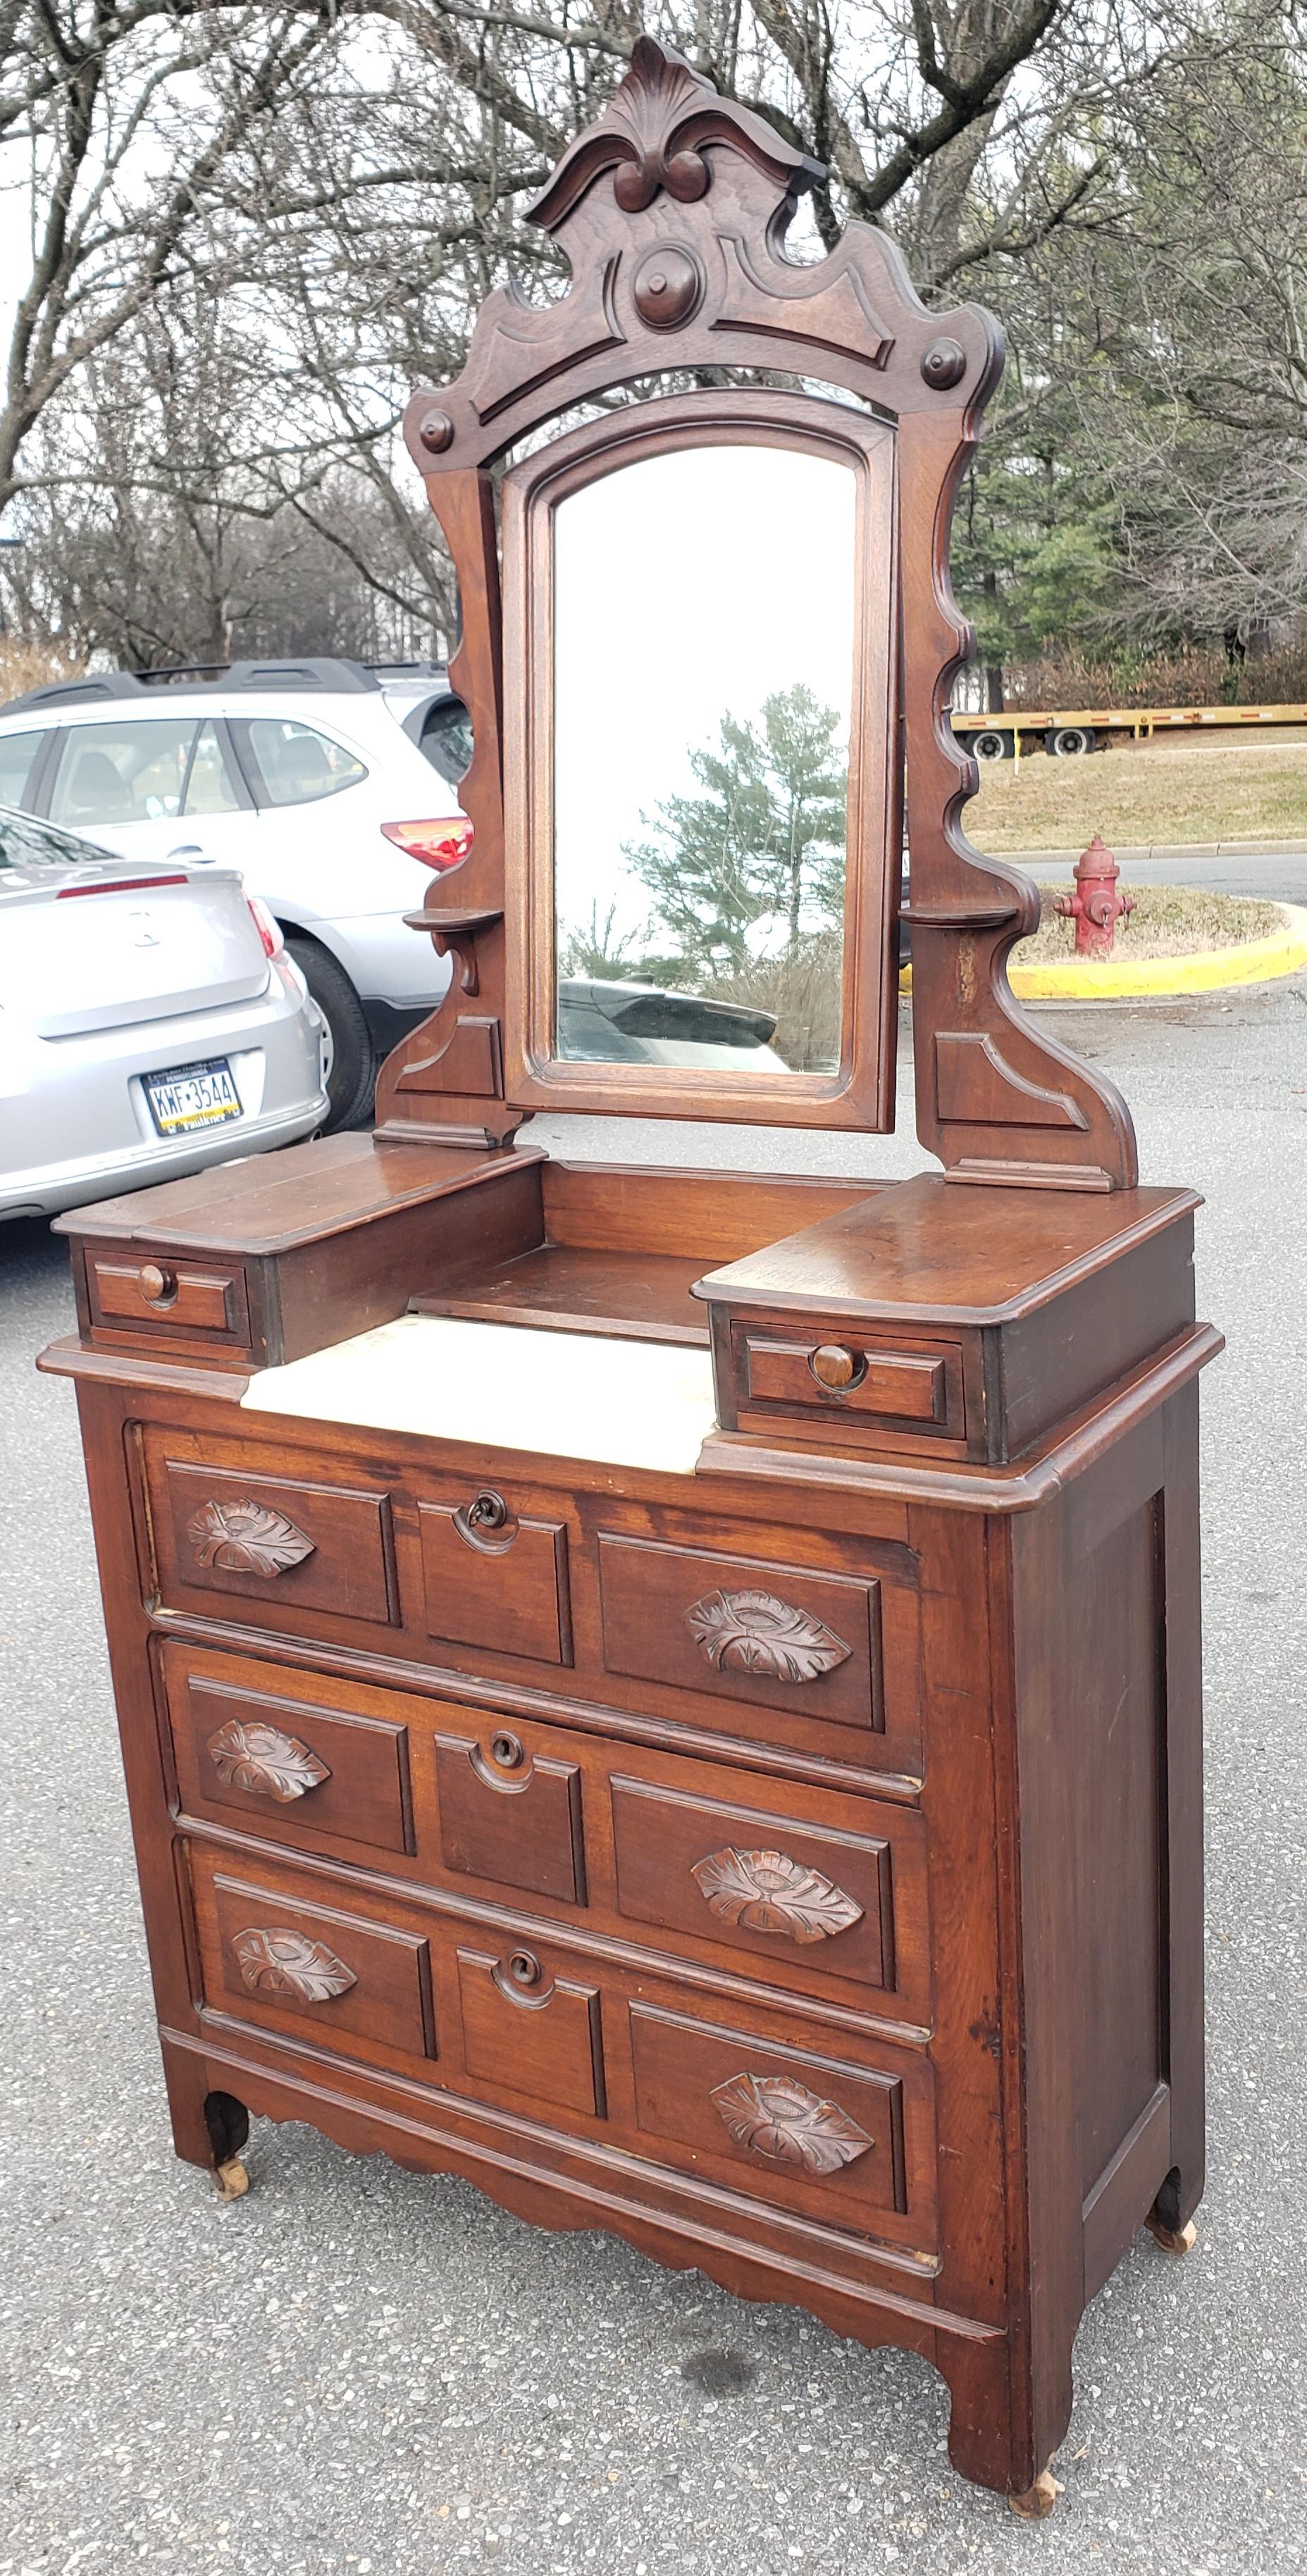 19th Century. American Empire Eastlake Mahogany Dresser with Marble Top Inset and edwardian style Mirror on wheel. 3 large drawers and 2 small drawers. Measures 38.75W x 17.5